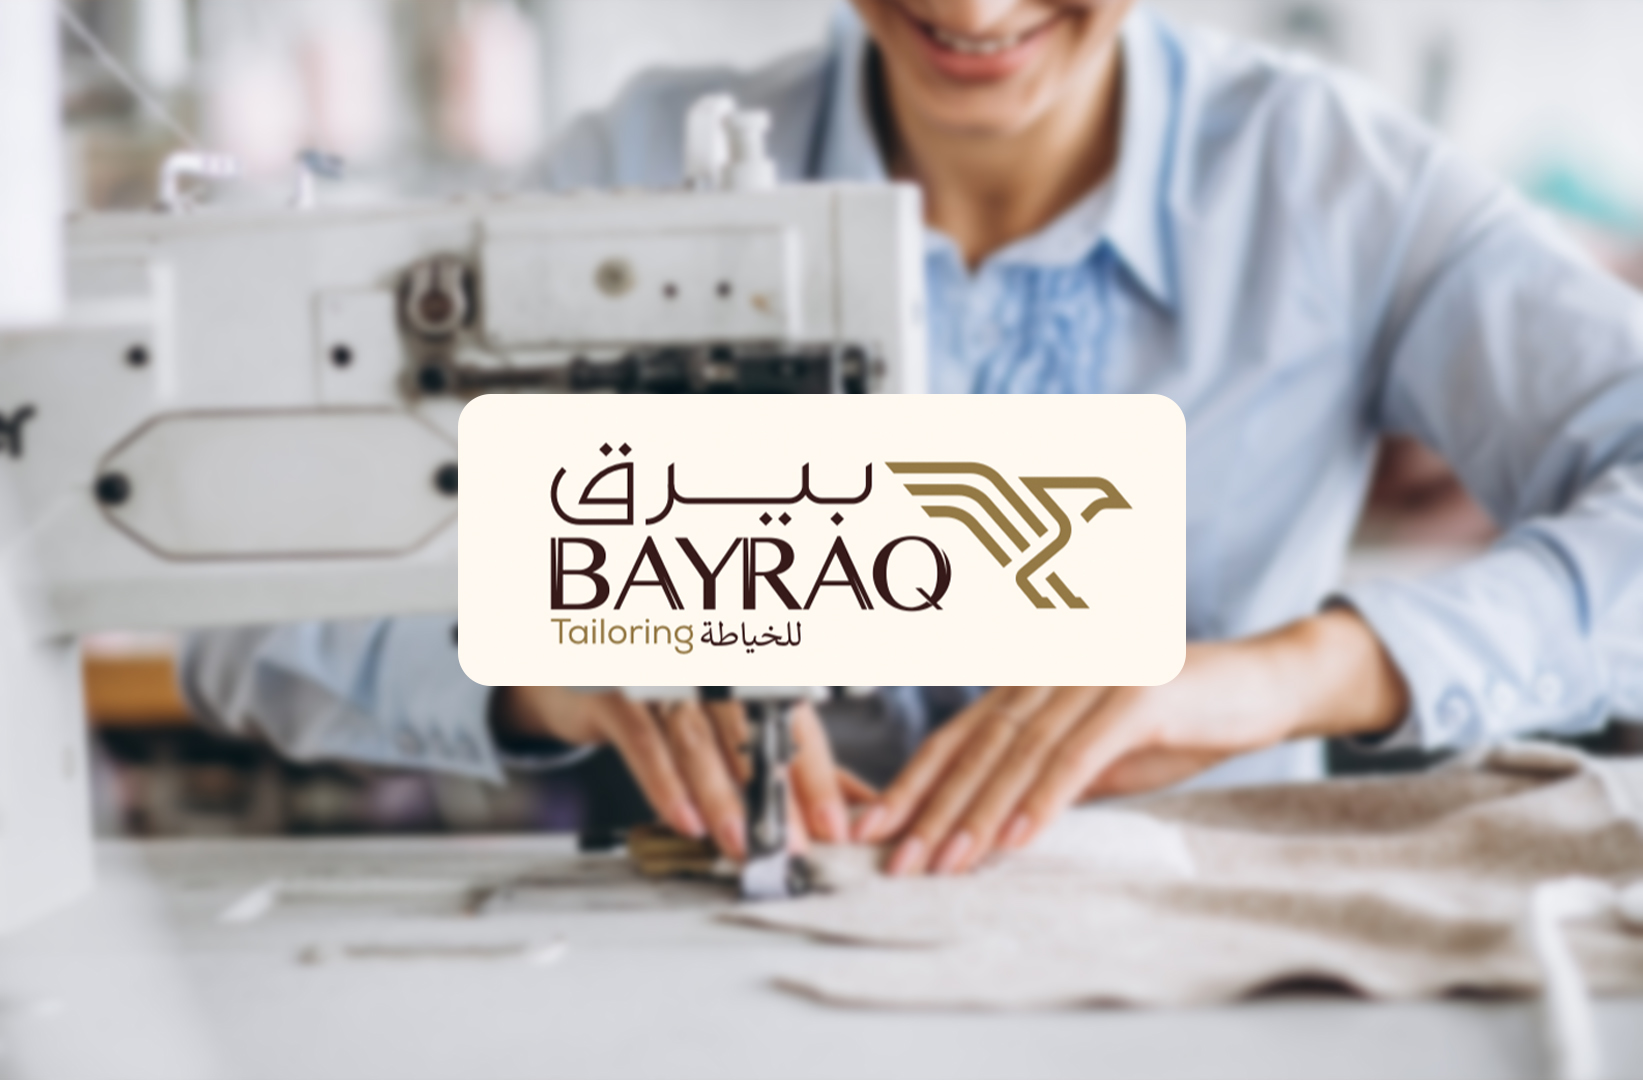 Bayraq, Odoo ERP Integration, Stitching Operations Transformation,Case Study Bayraq, Textile Industry Efficiency, ERP Implementation Success, Manufacturing Process Optimization, Bayraq ERP Integration, Seamless Stitching Operations, Productivity Boost with Odoo, Textile Industry ERP Solution